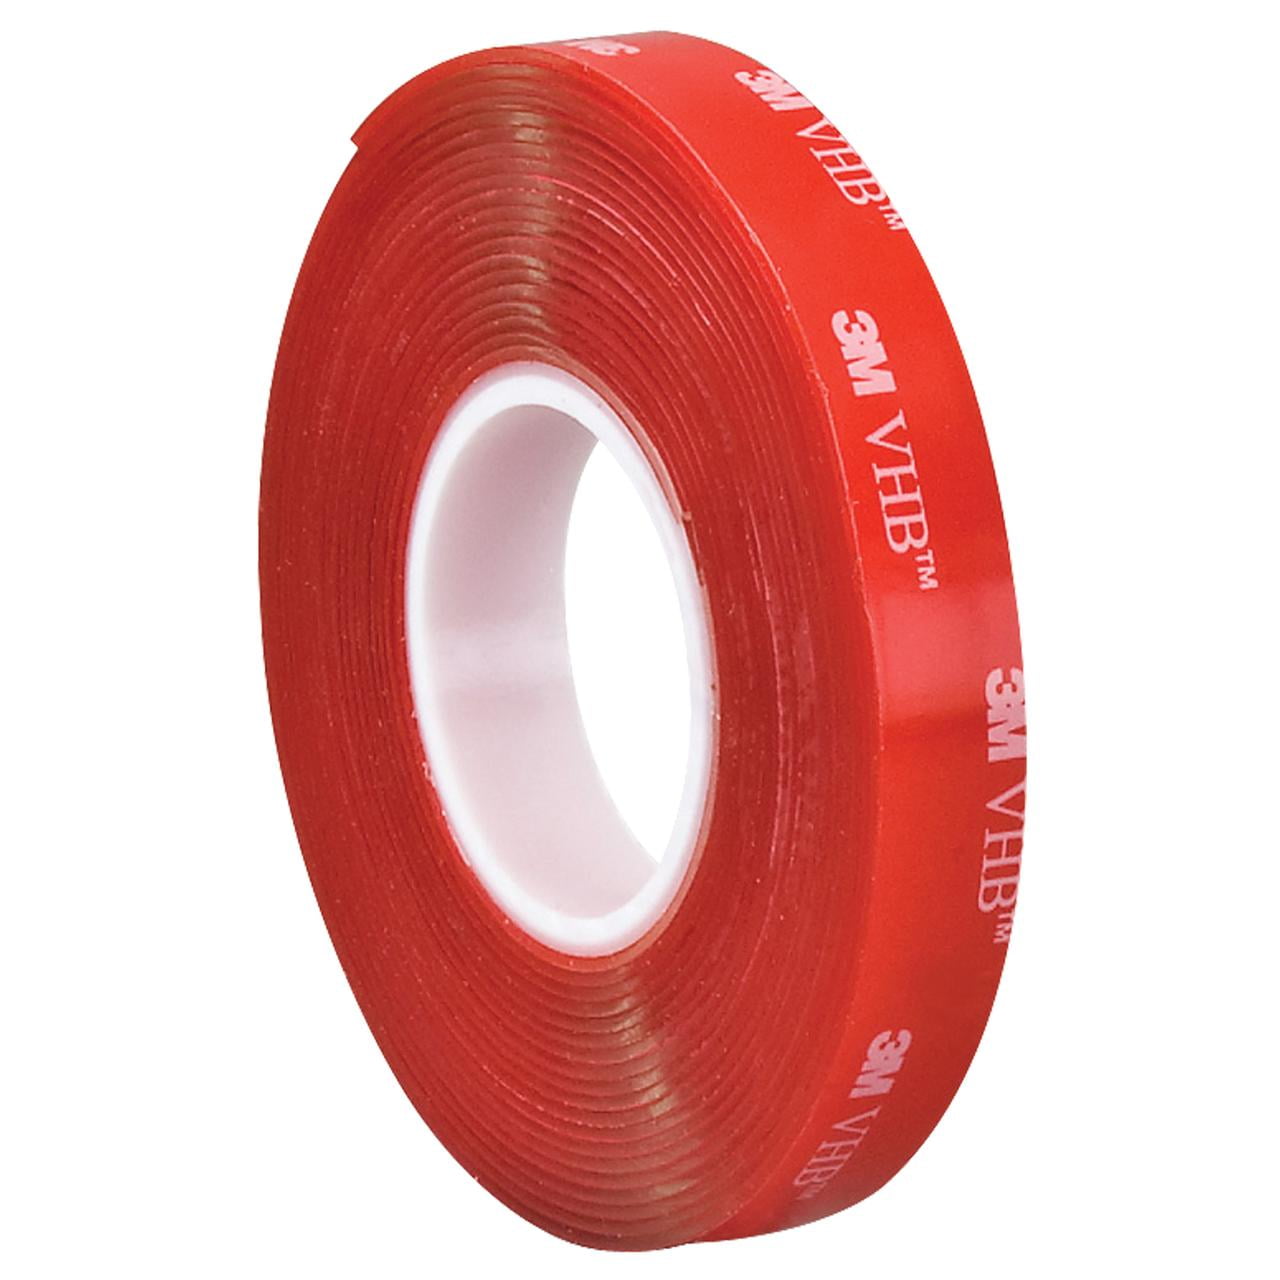 491034r 0.75 In. X 5 Yards Clear 3m 4910 Tape